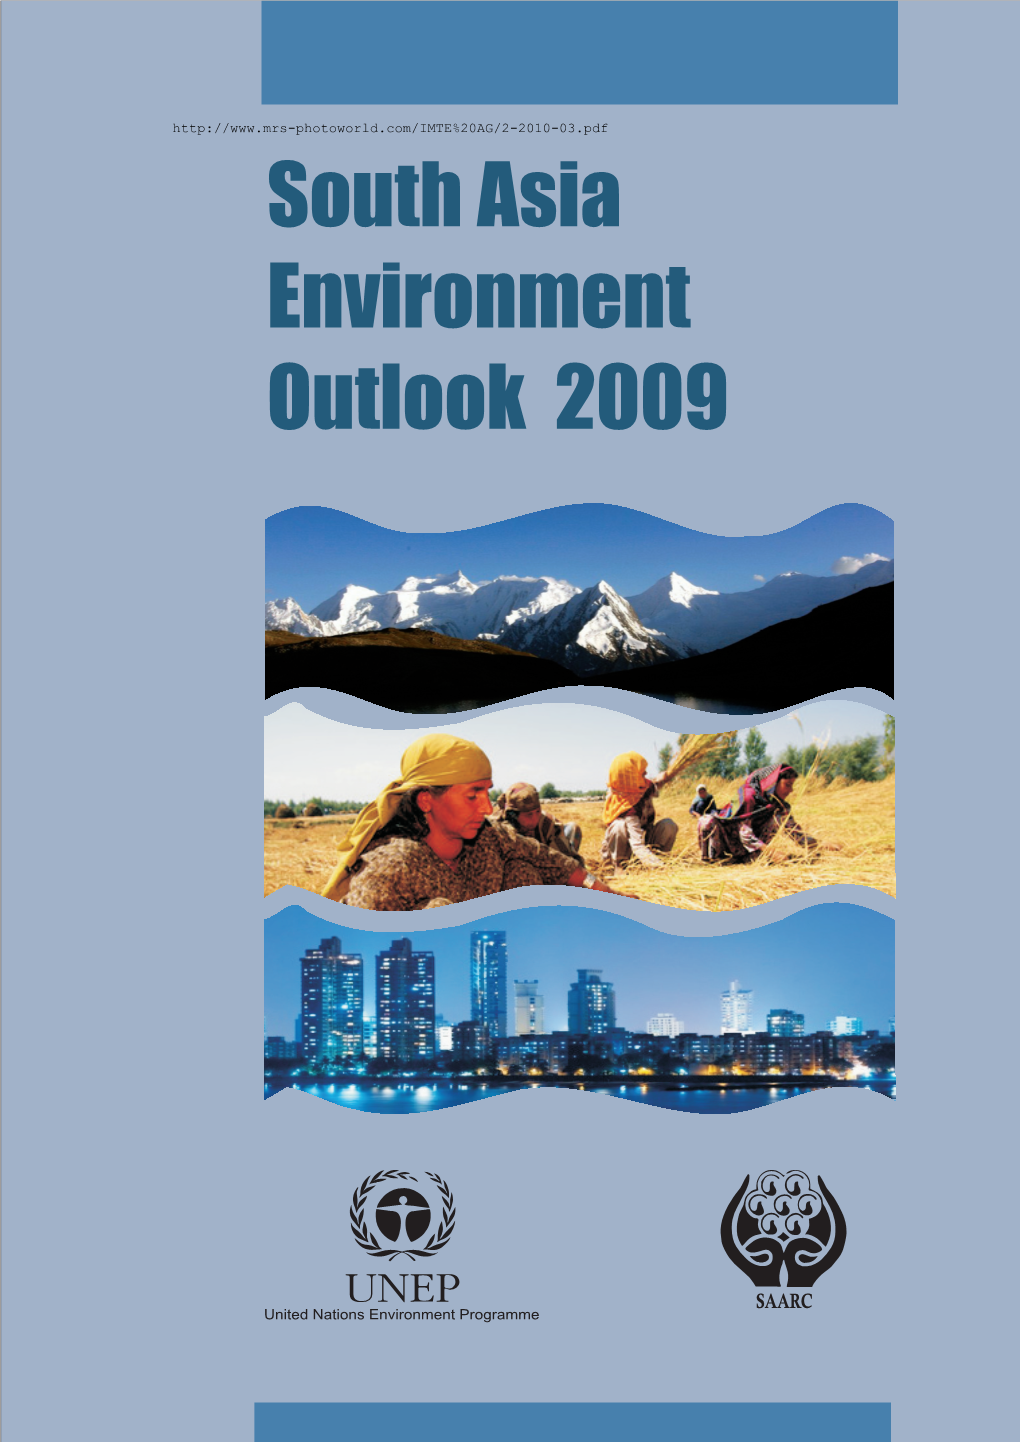 South Asia Environment Outlook 2009